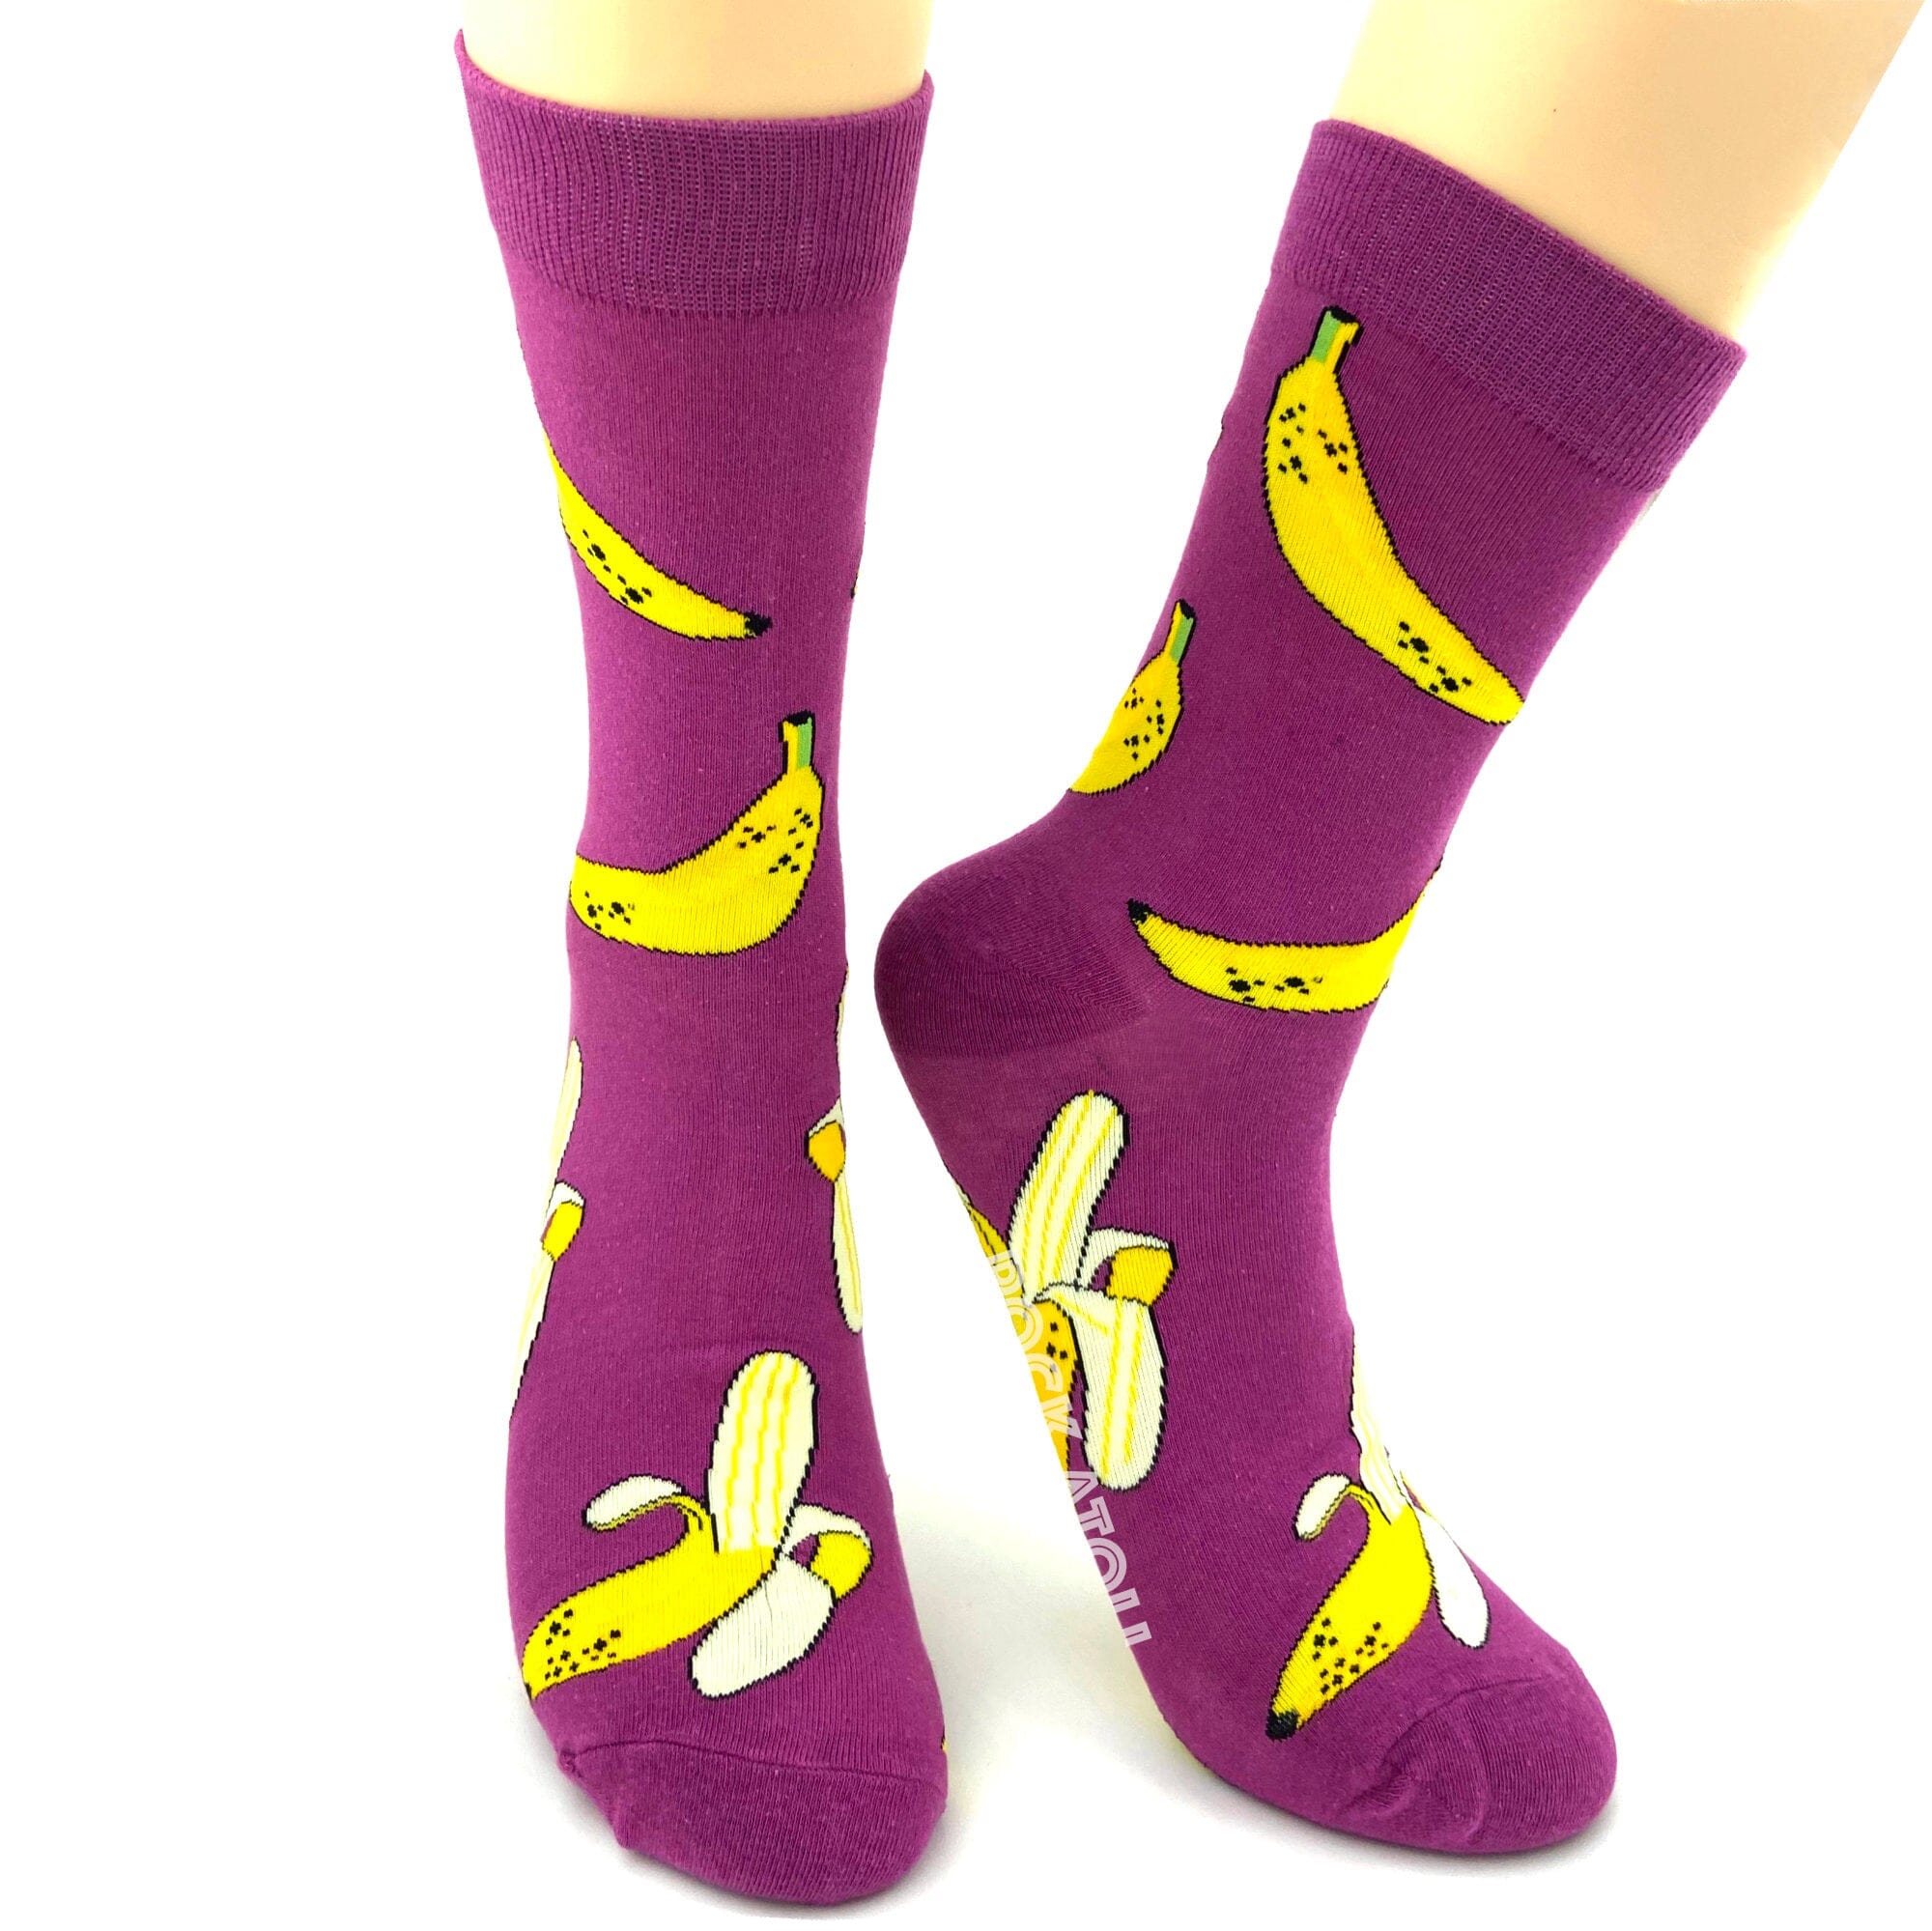 Colorful Fruity Banana Peel Patterned Durable Stretch Novelty Socks